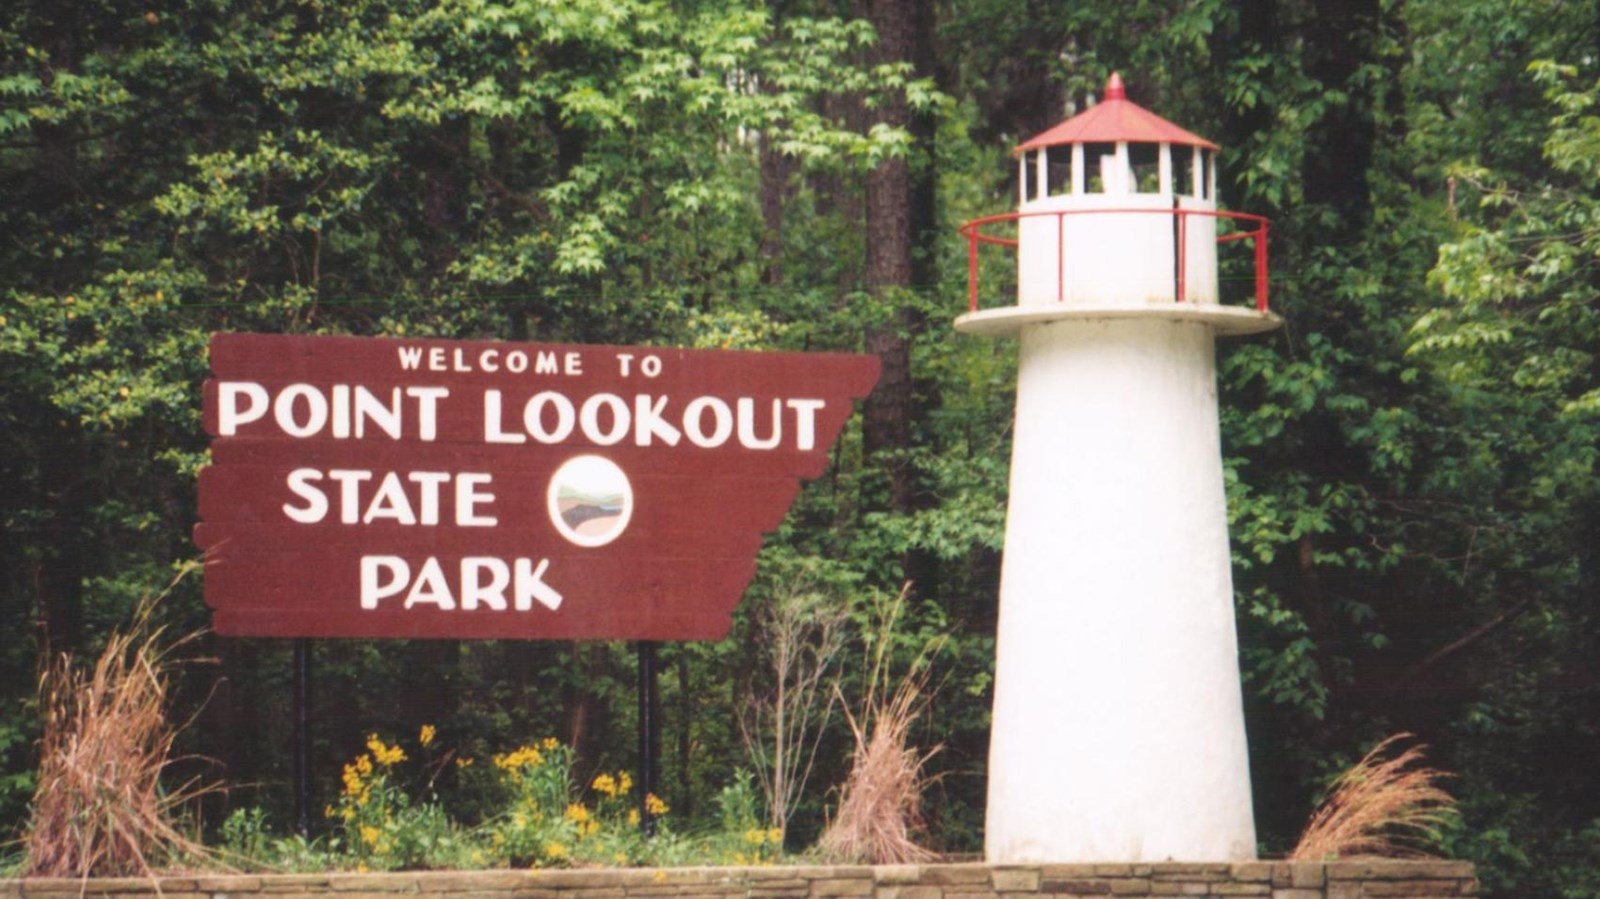 Entrance sign for Point Lookout State Park. 